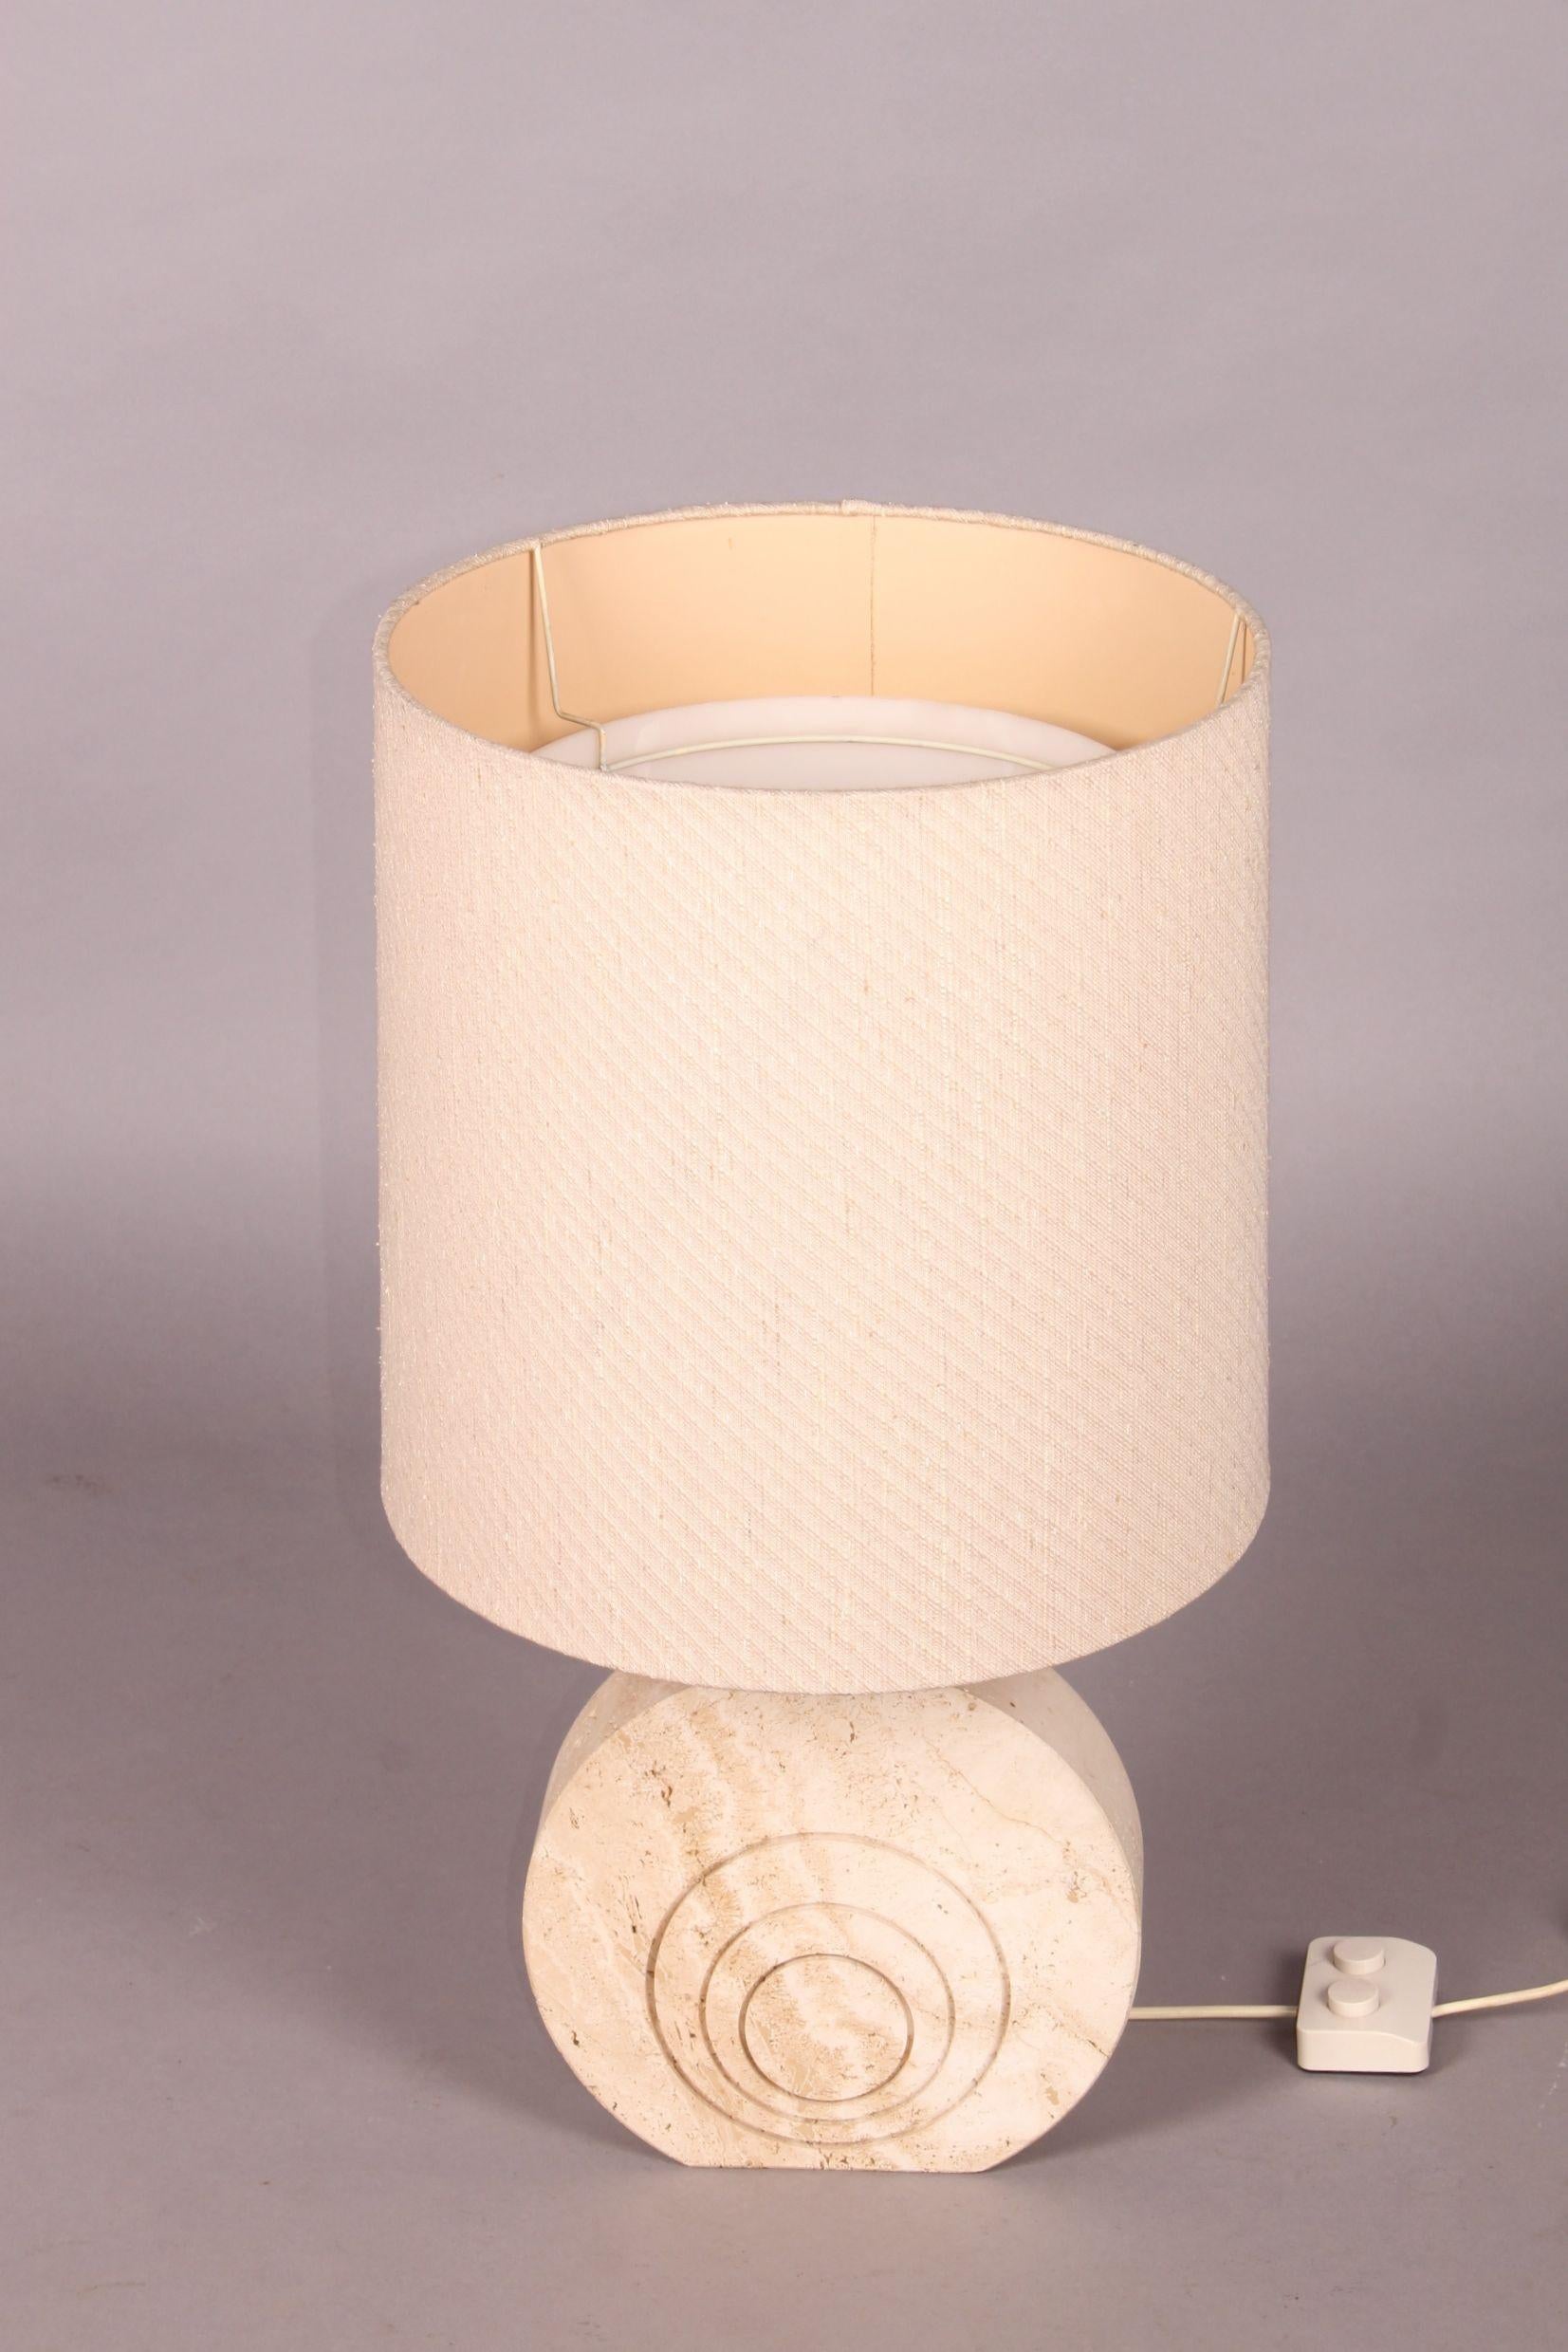 Travertine and brass Fratelli manelli table lamp